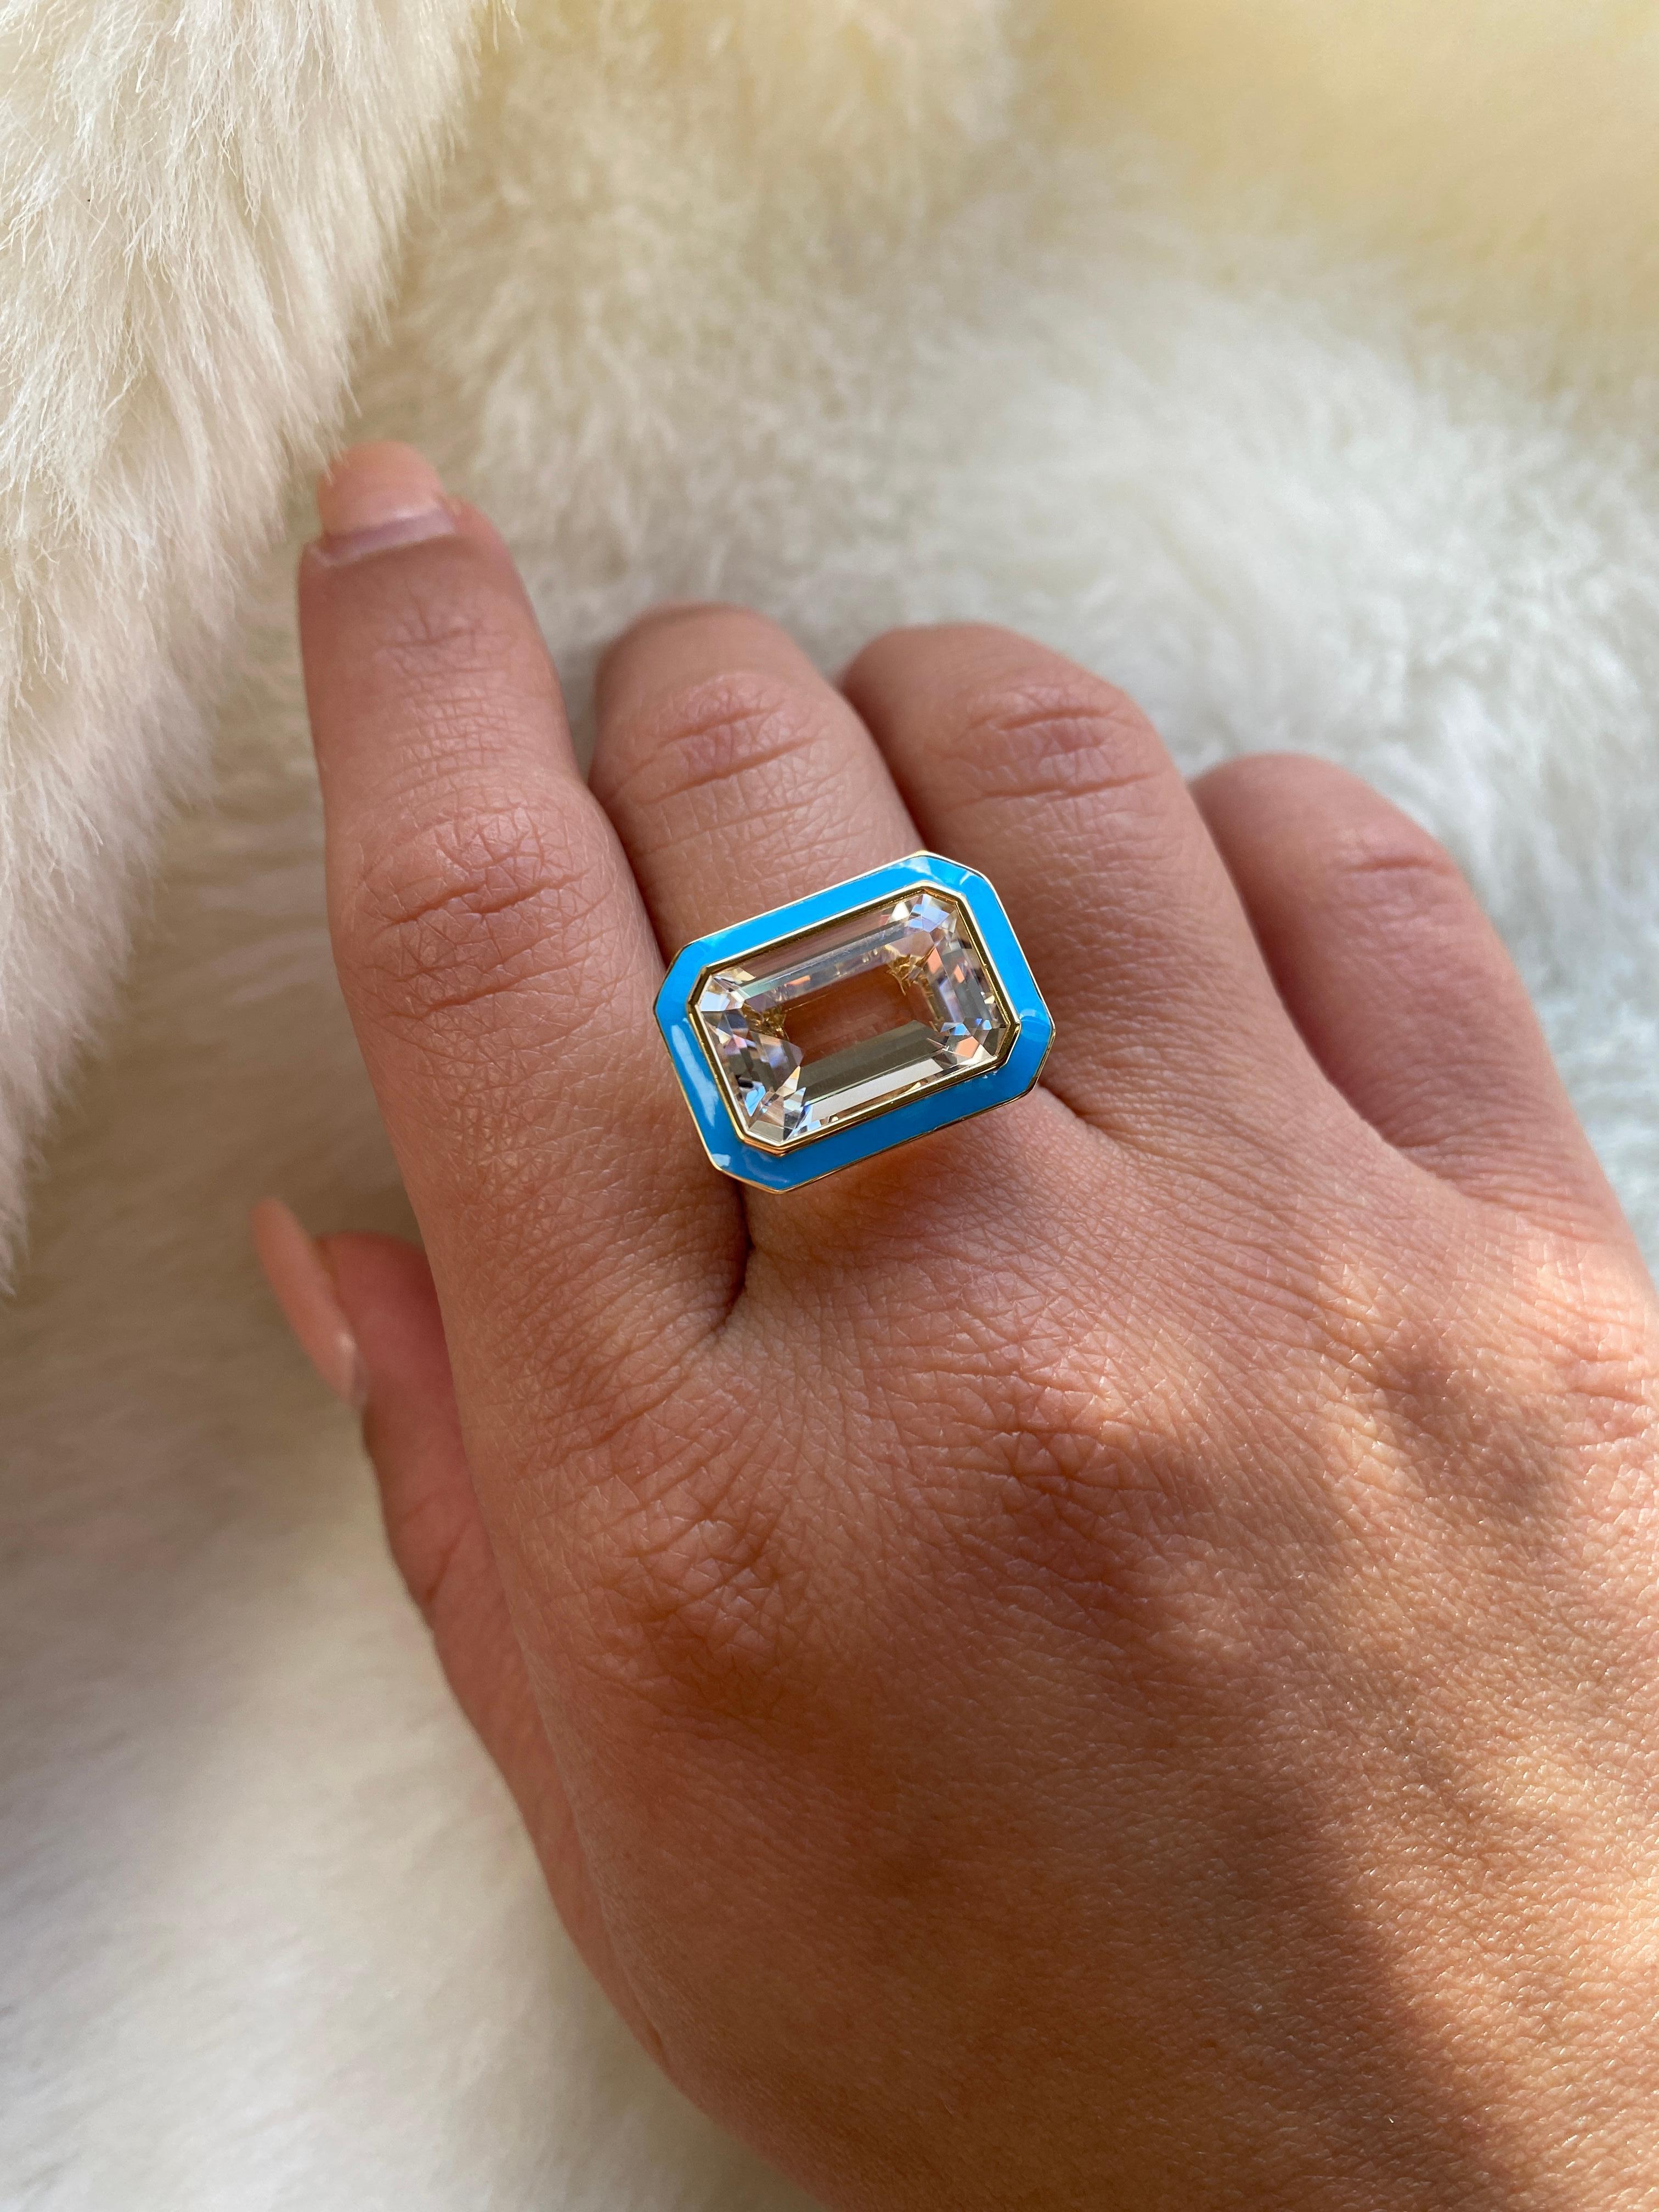 East-West Rock Crystal Ring with Turquoise Enamel in 18K Yellow Gold, from 'Queen' Collection. The combination of enamel and Rock Crystal represents power, richness and passion of a true Queen. The feeling of luxury is what we’re aiming for. This